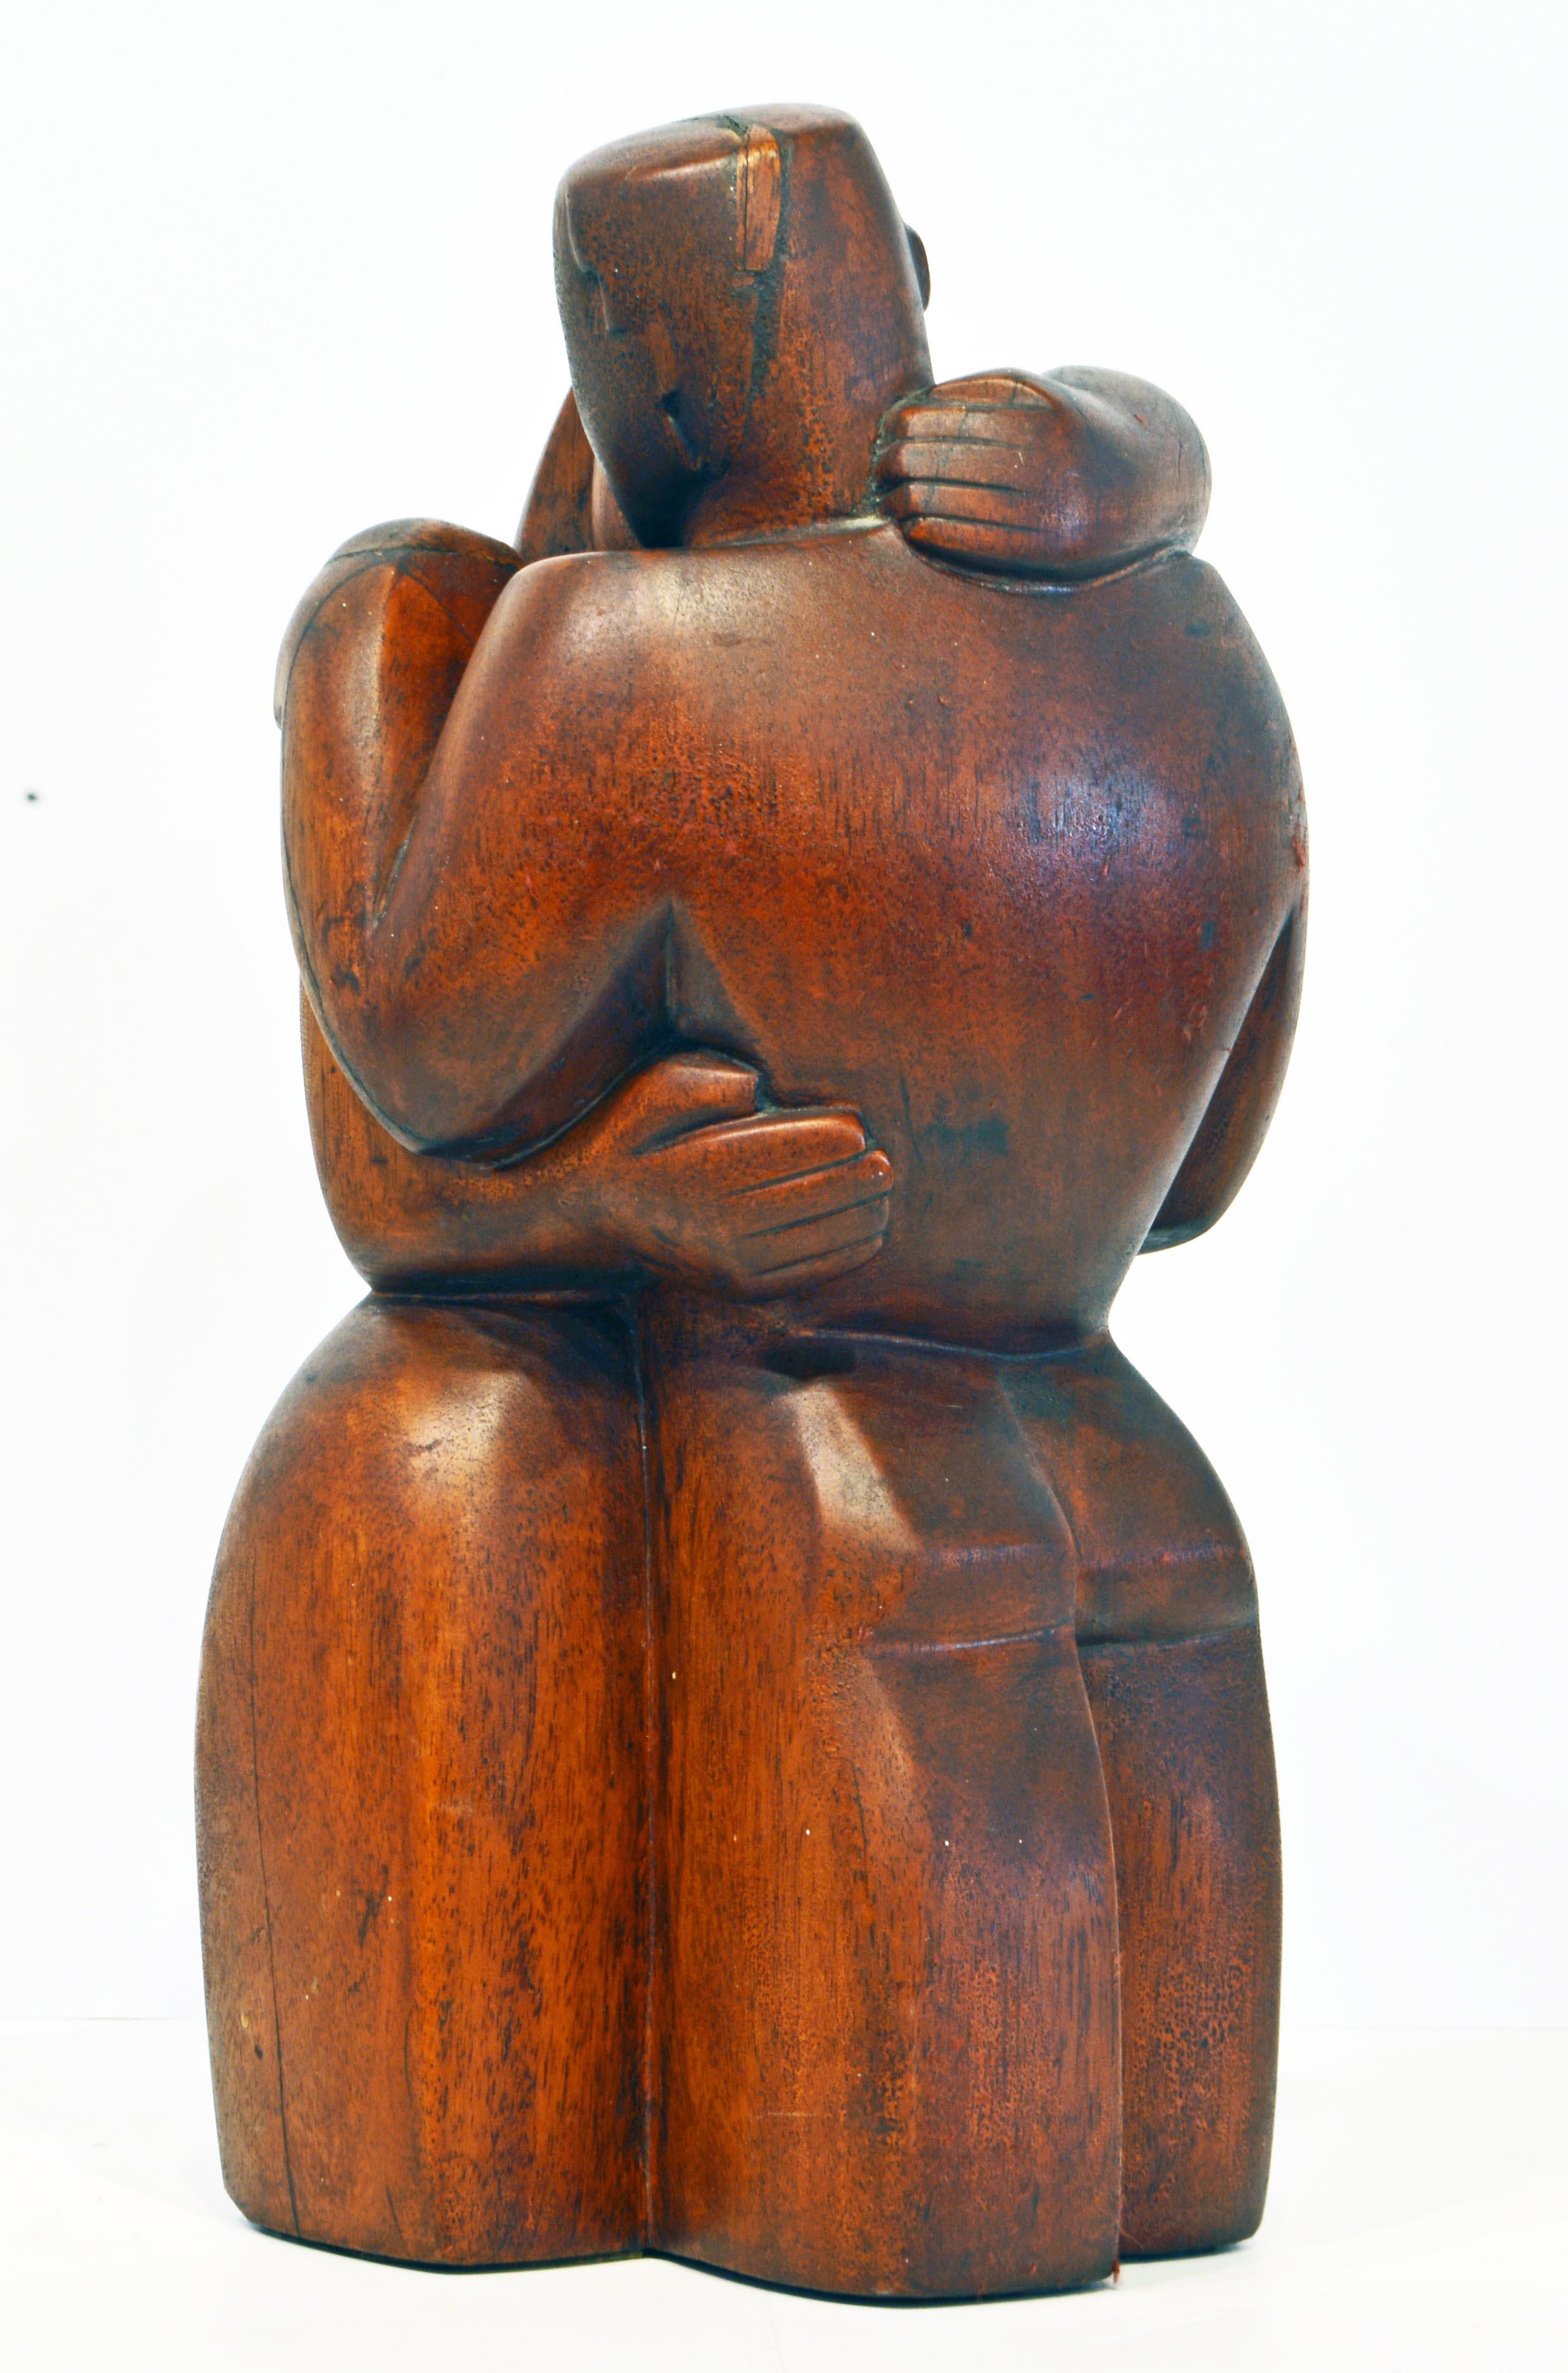 American Carved Cubist Style Mahogany Sculpture 'Farewell' by Clara Shainess, 1896-1987